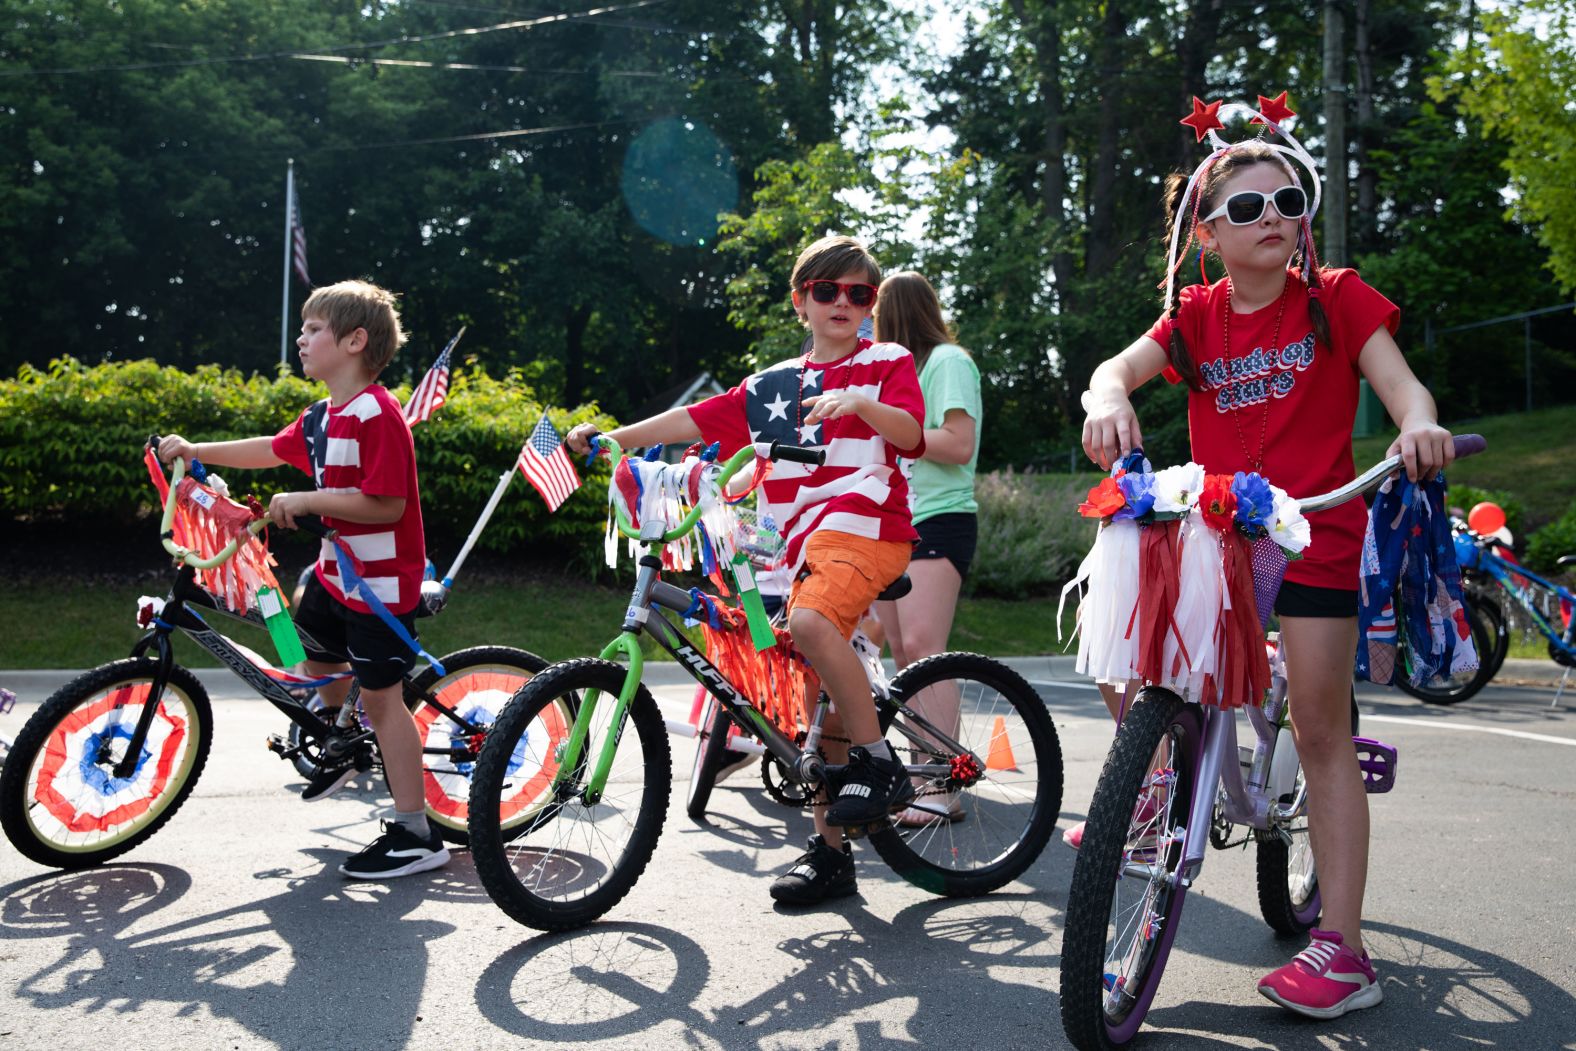 Young kids dressed up get ready to ride in an Independence Day parade celebration on July 4, in Brighton, Michigan.